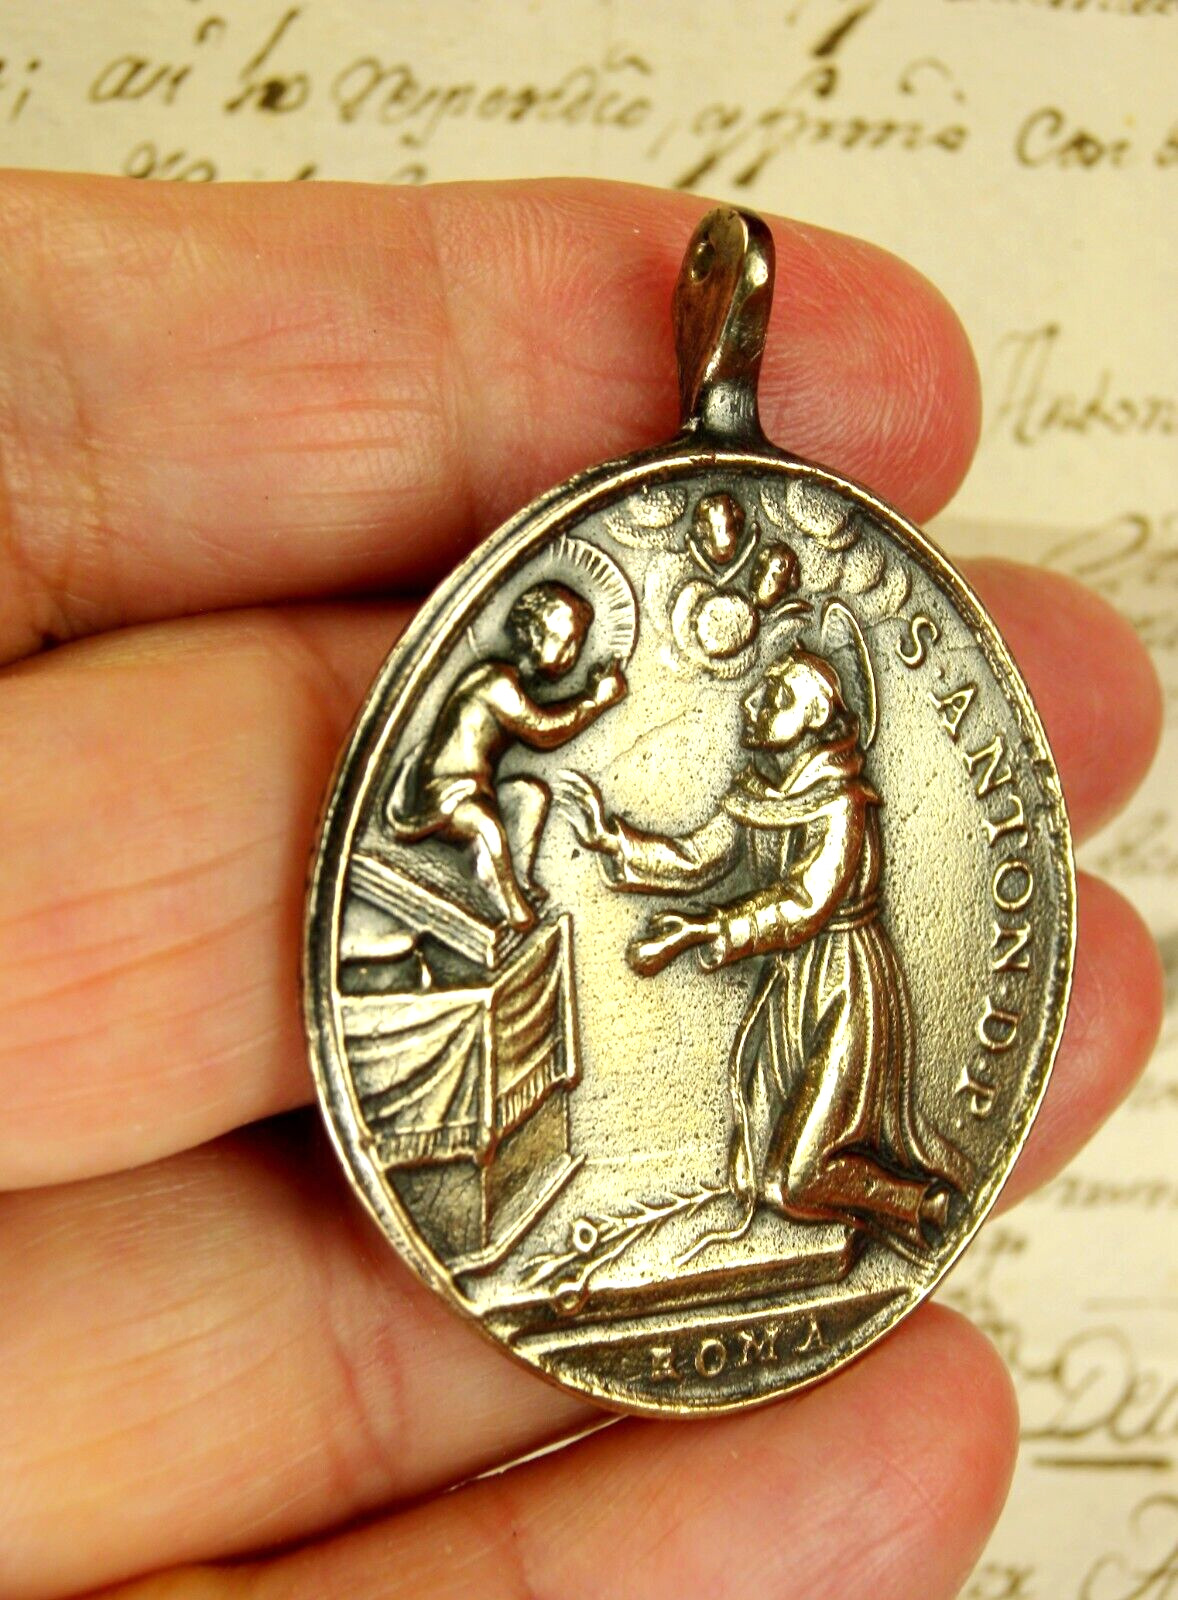 ANTIQUE 18TH CENTURY THE ECSTASY OF ST ANTHONY & OUR LADY OF PILLAR BRONZE MEDAL